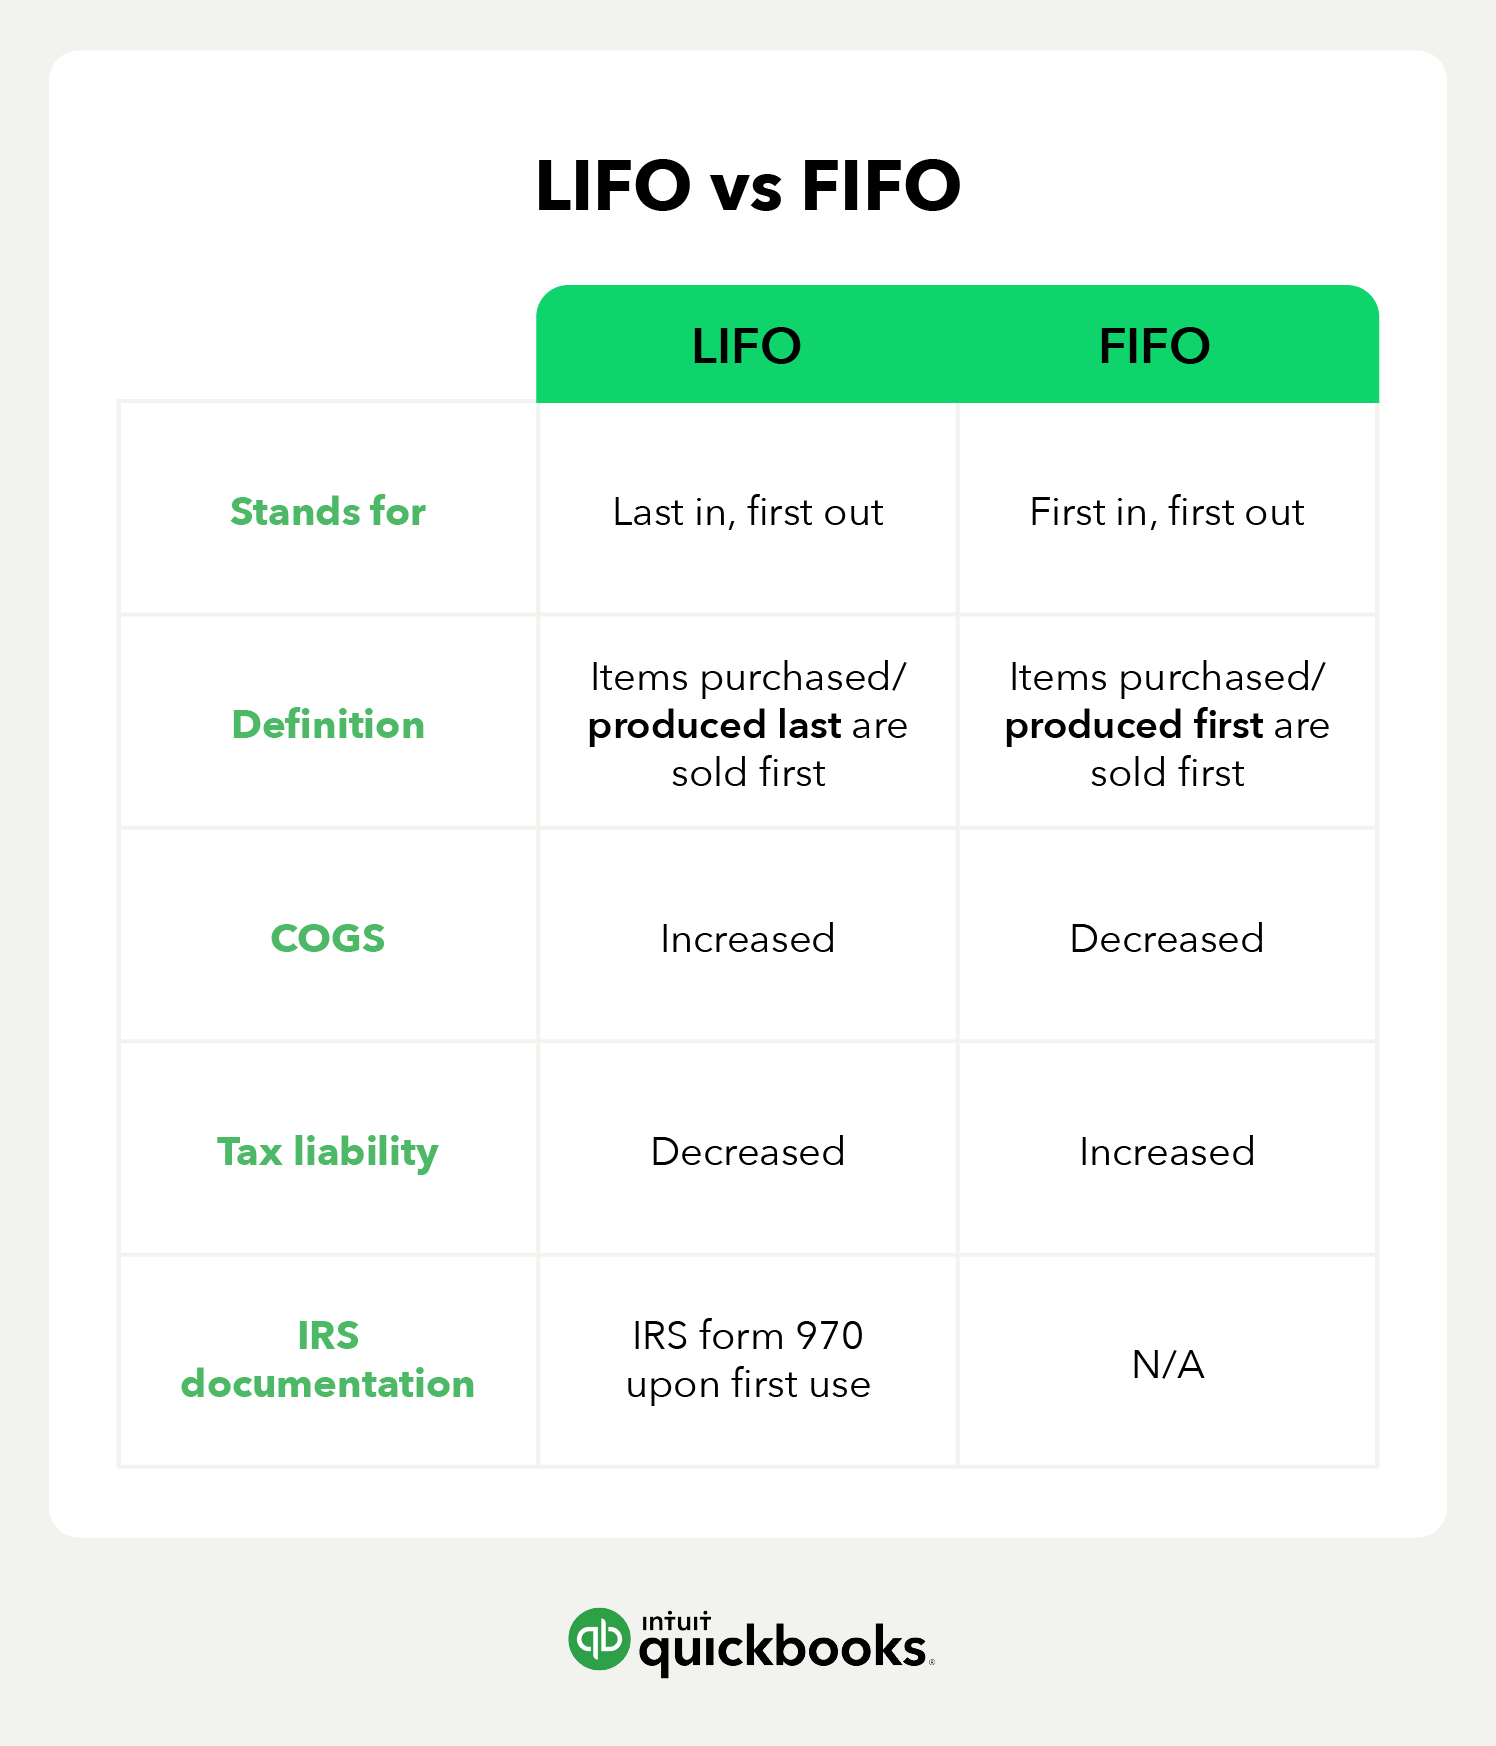 LIFO vs FIFO with definition, impact on COGS, tax liability, and required IRS documentation for usage of LIFO.